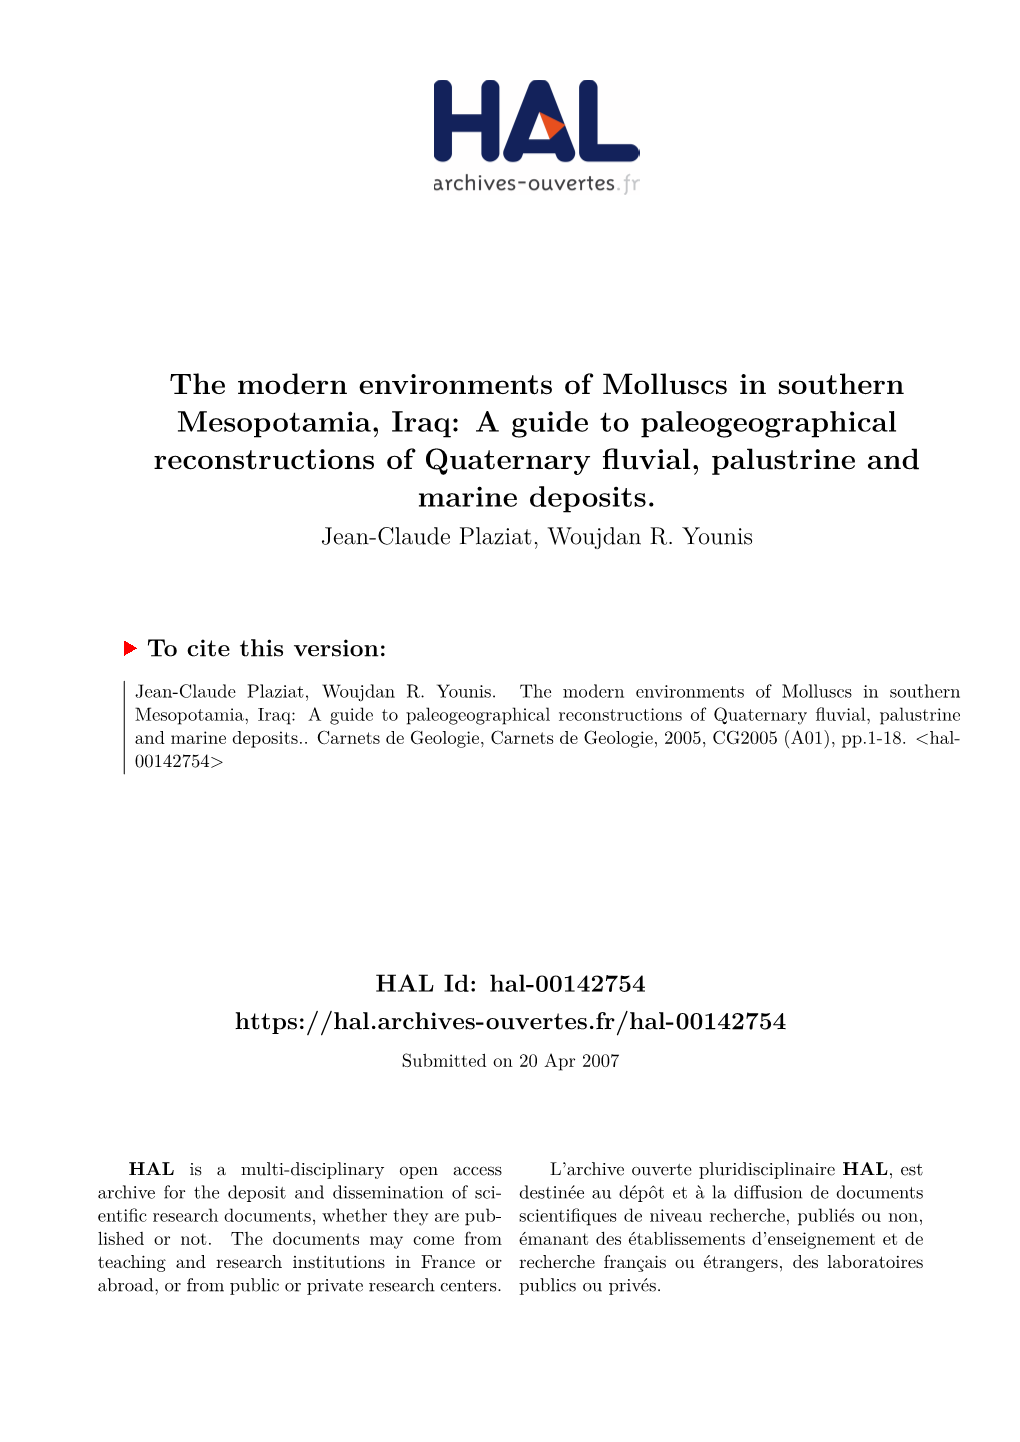 The Modern Environments of Molluscs in Southern Mesopotamia, Iraq: a Guide to Paleogeographical Reconstructions of Quaternary Fluvial, Palustrine and Marine Deposits